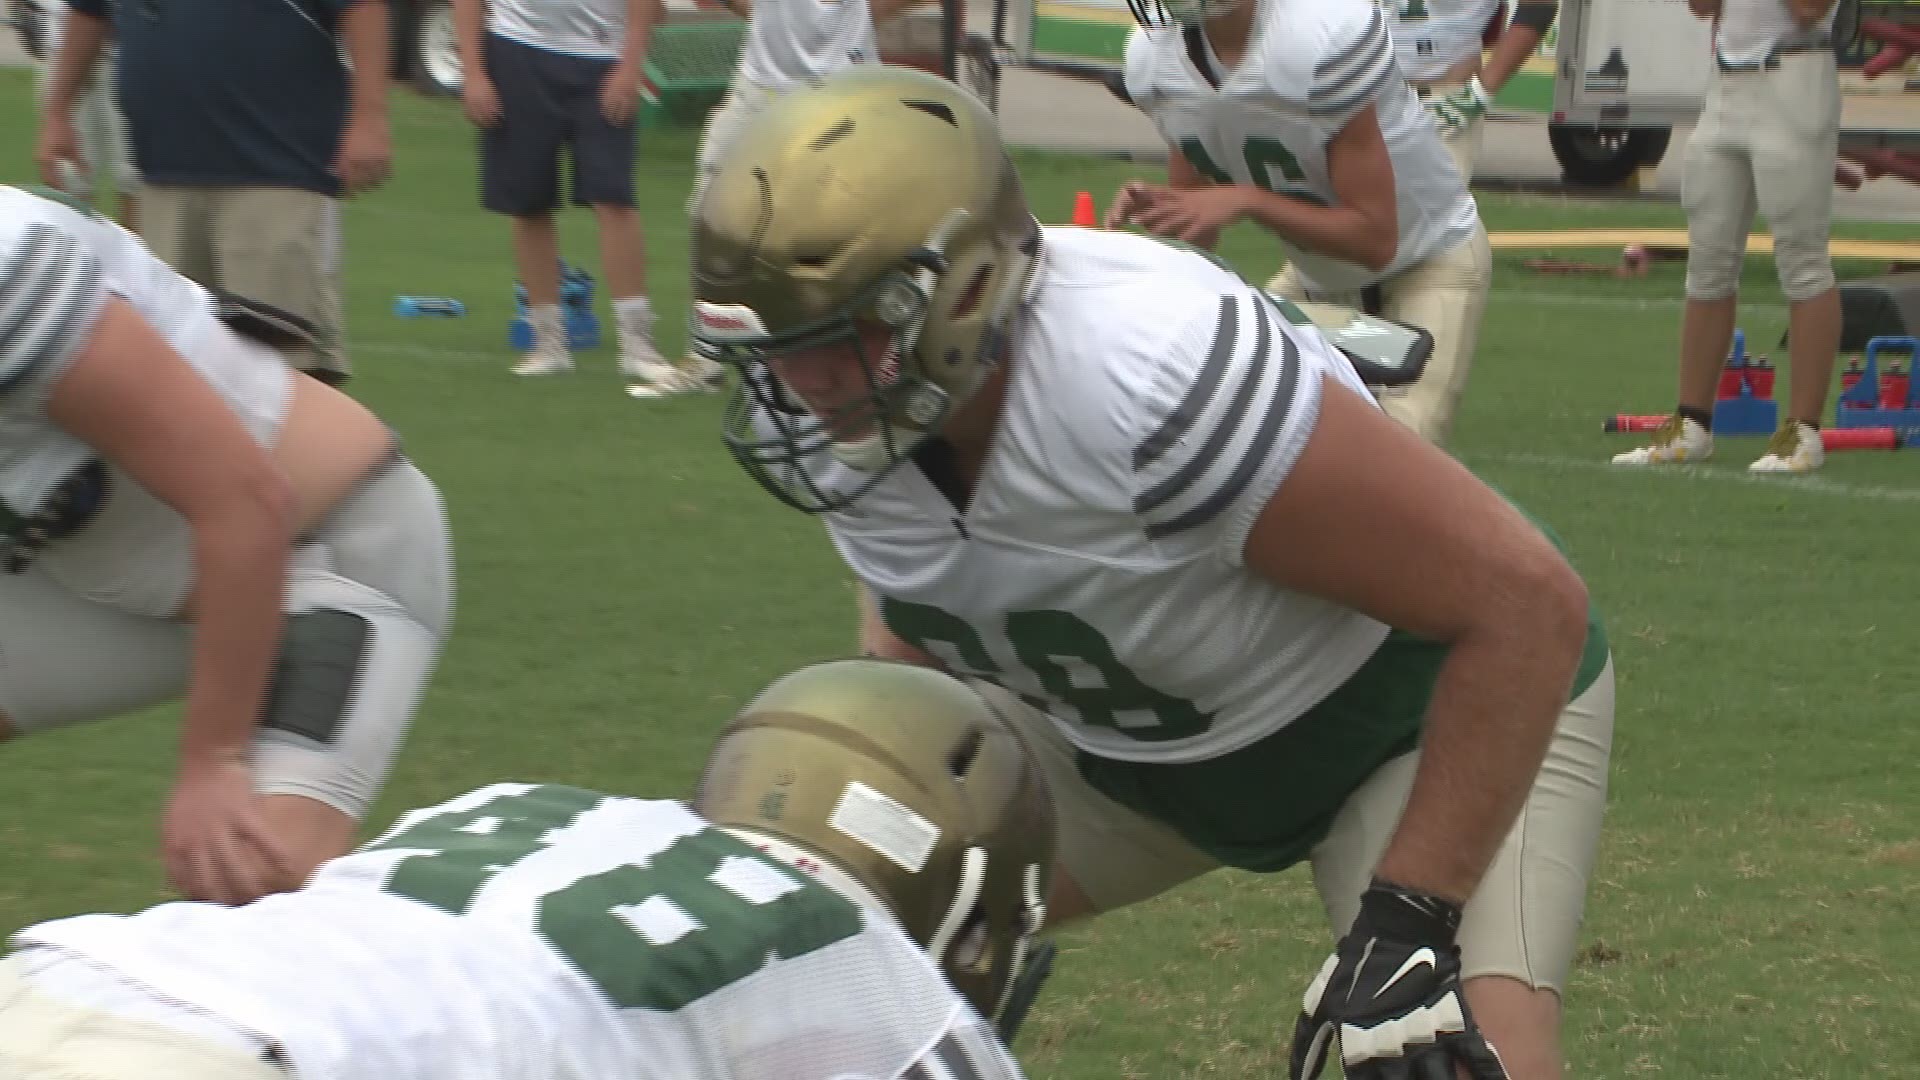 The newest Georgia Bulldog, Cade Mays of Knoxville Catholic, talks about his decision to go to Athens.